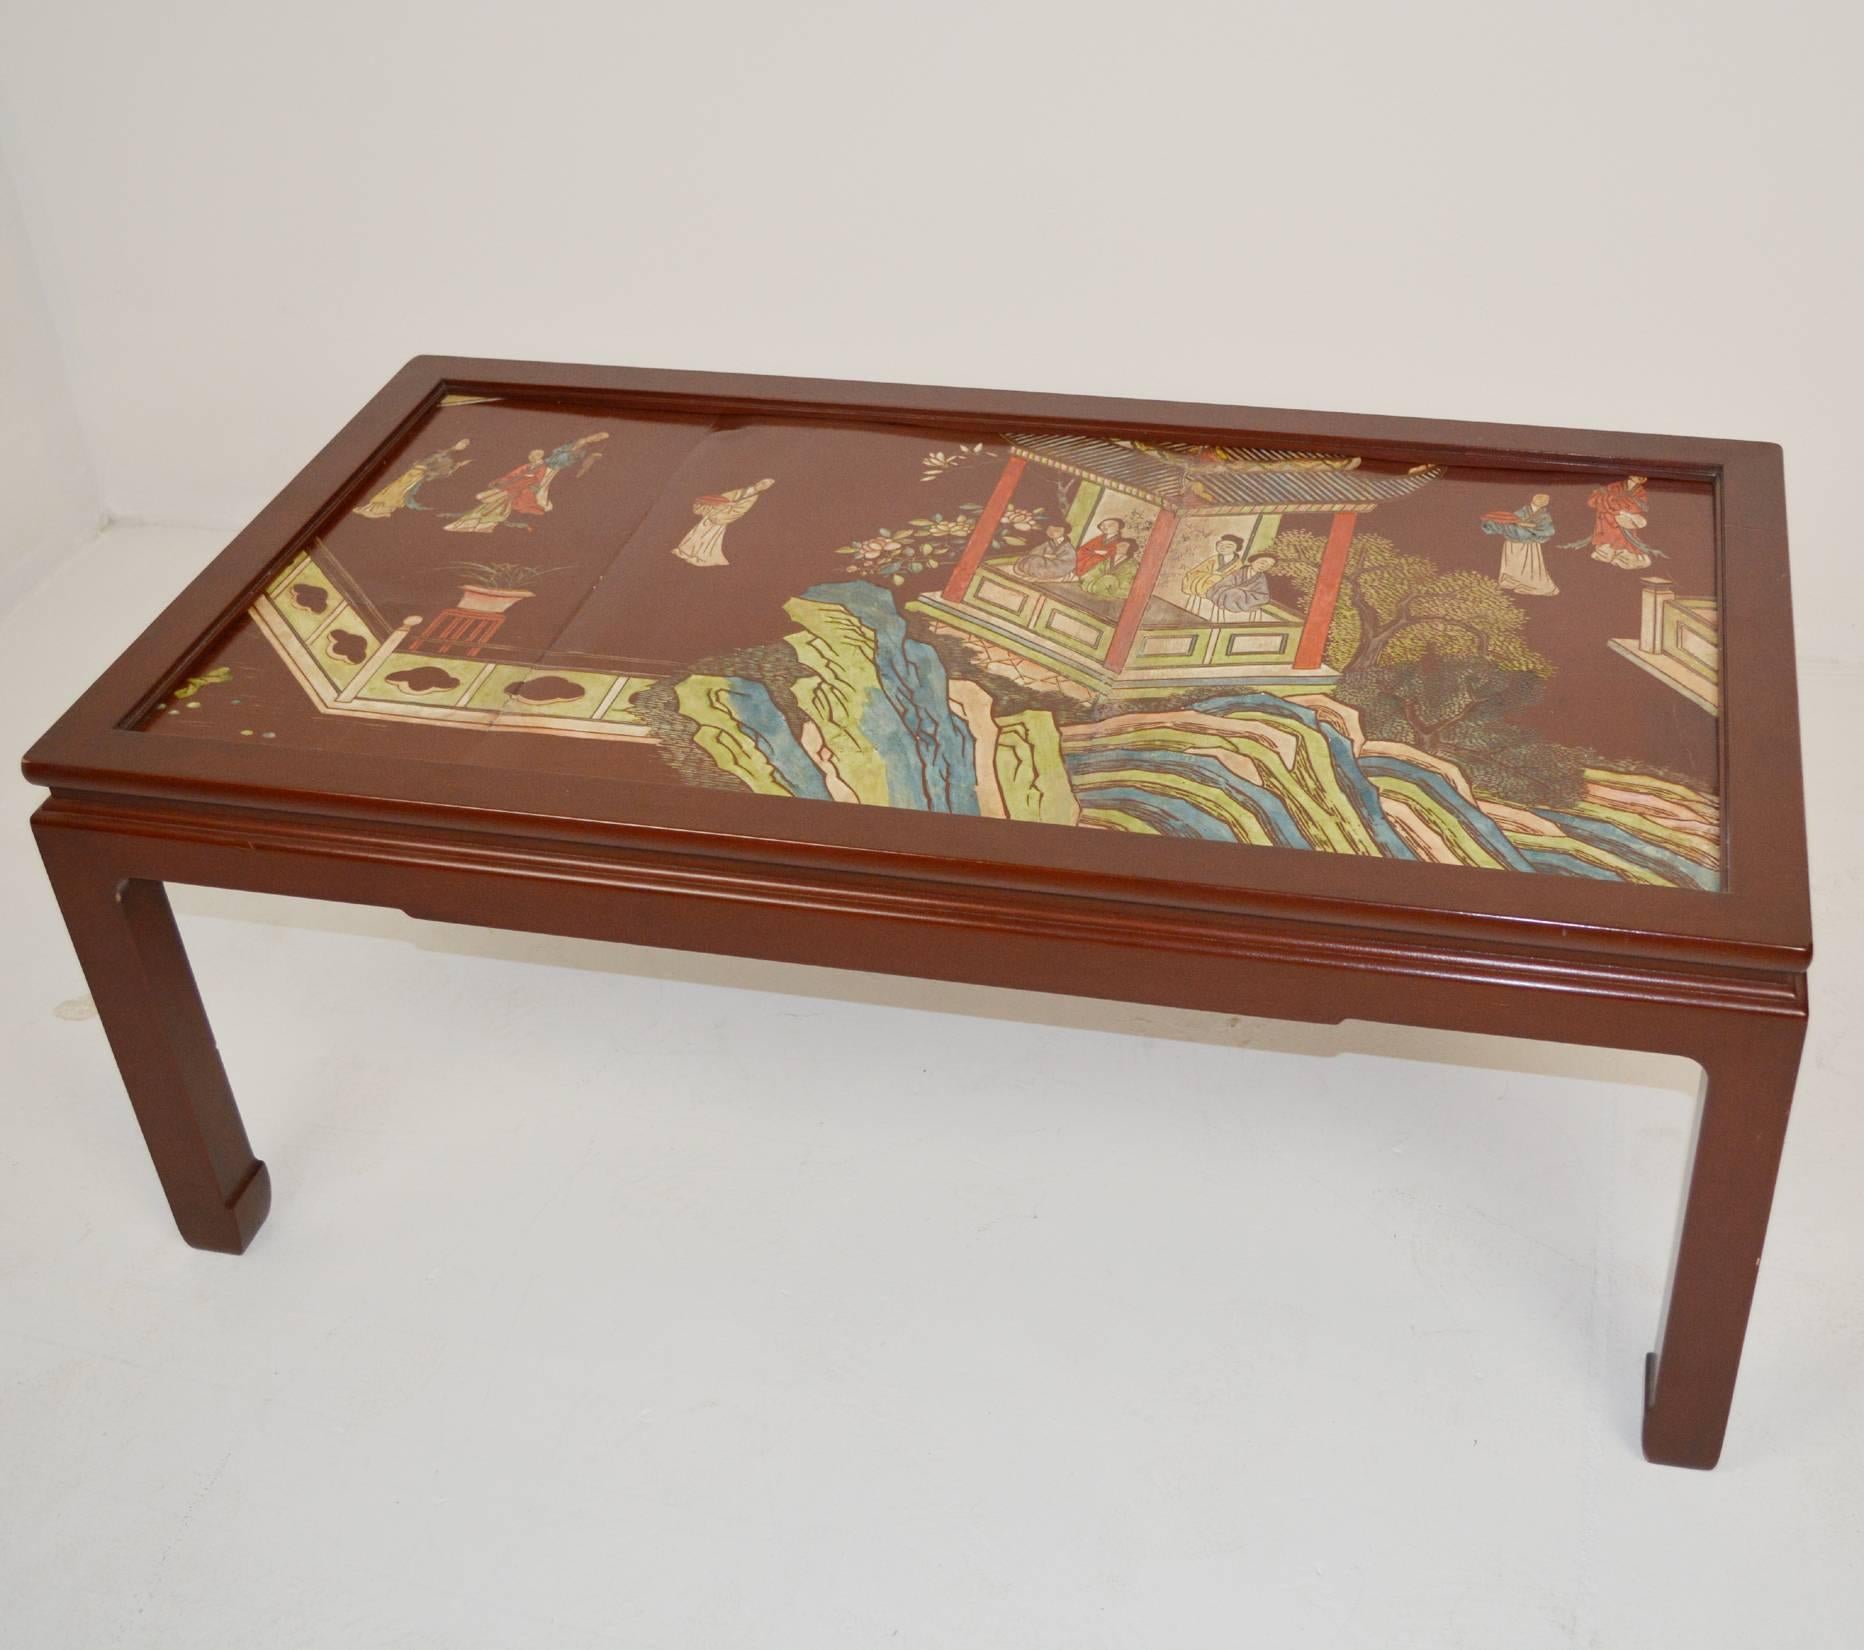 A Chinese coromandel lacquer panel mounted in a lovely Chinese red frame as a coffee table.